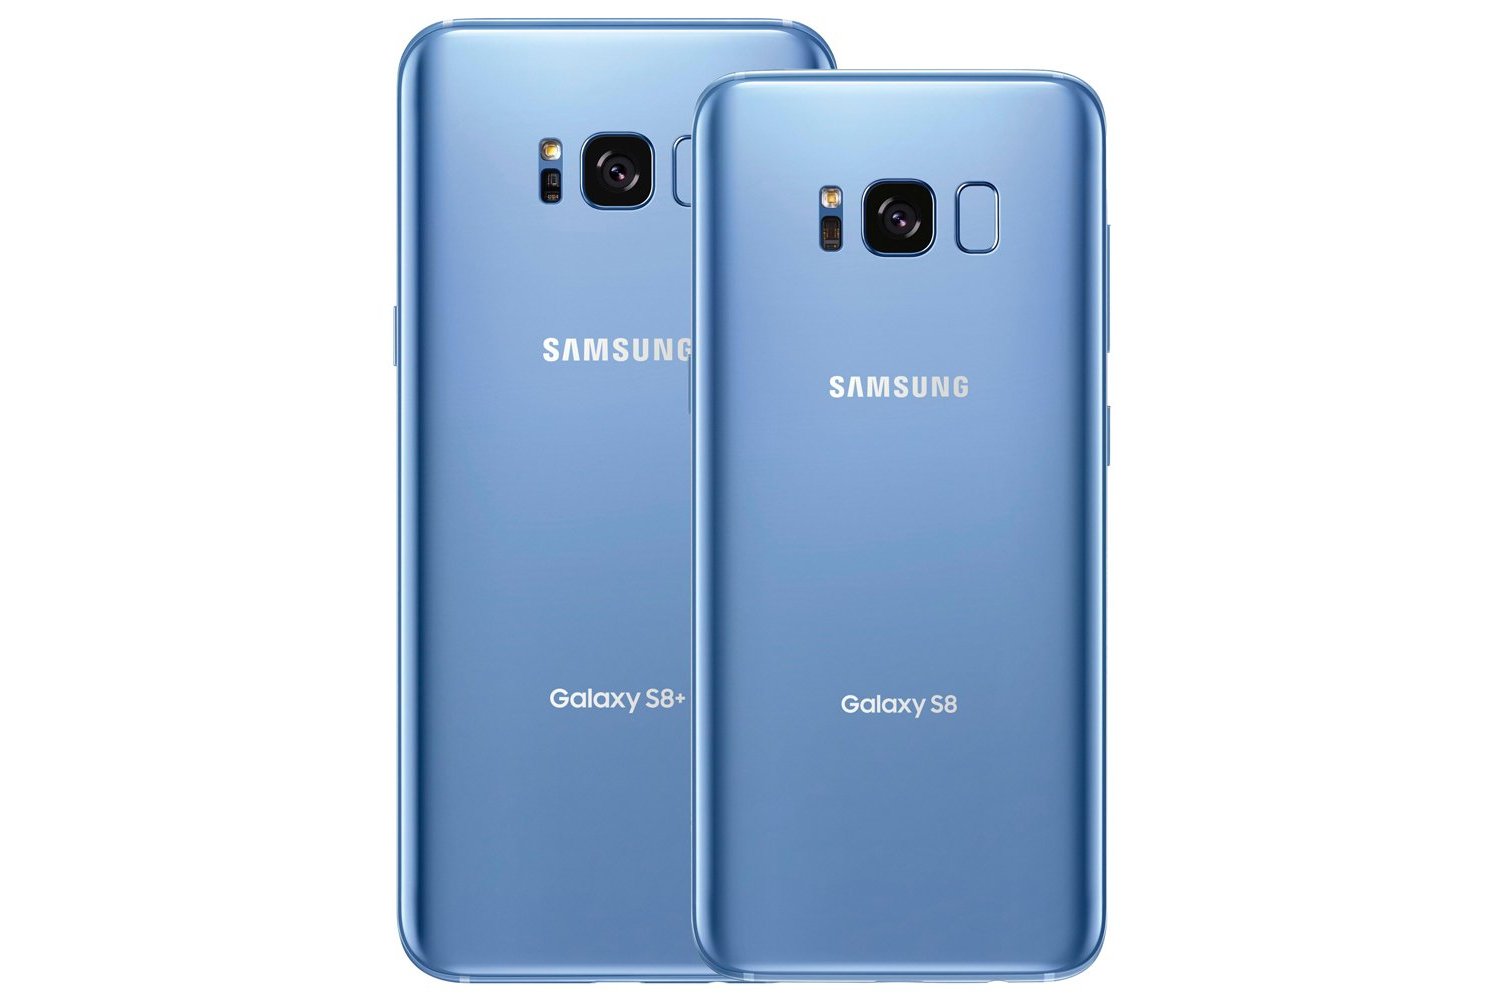 Coral Blue Galaxy S8 available on Best Buy US tomorrow. Also a possible Galaxy S8 promo